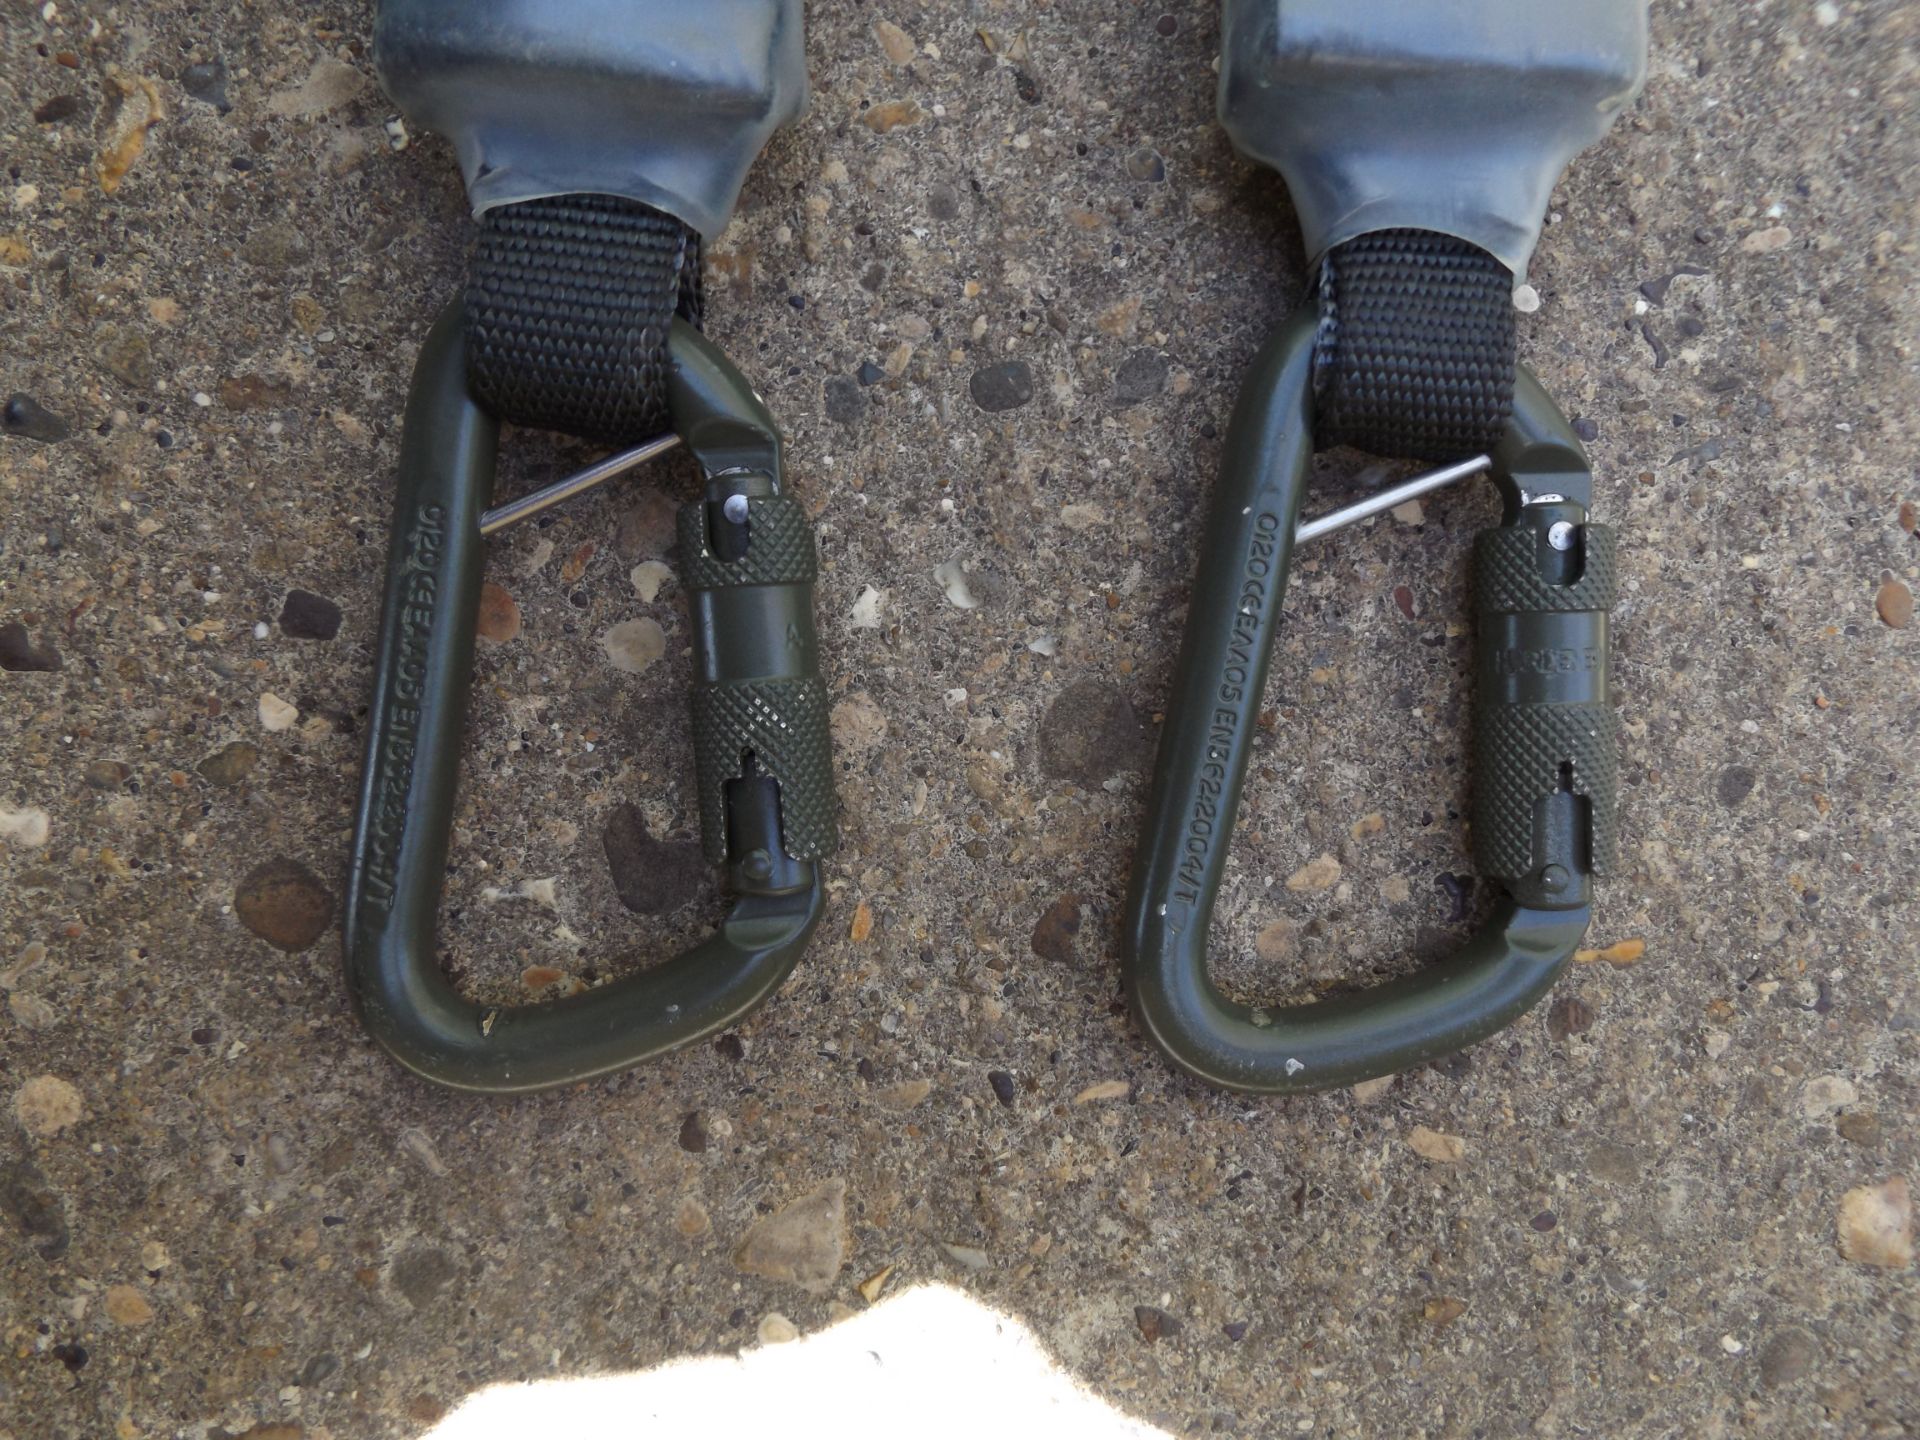 Spanset Full Body Harness with Work Position Lanyards - Image 8 of 10